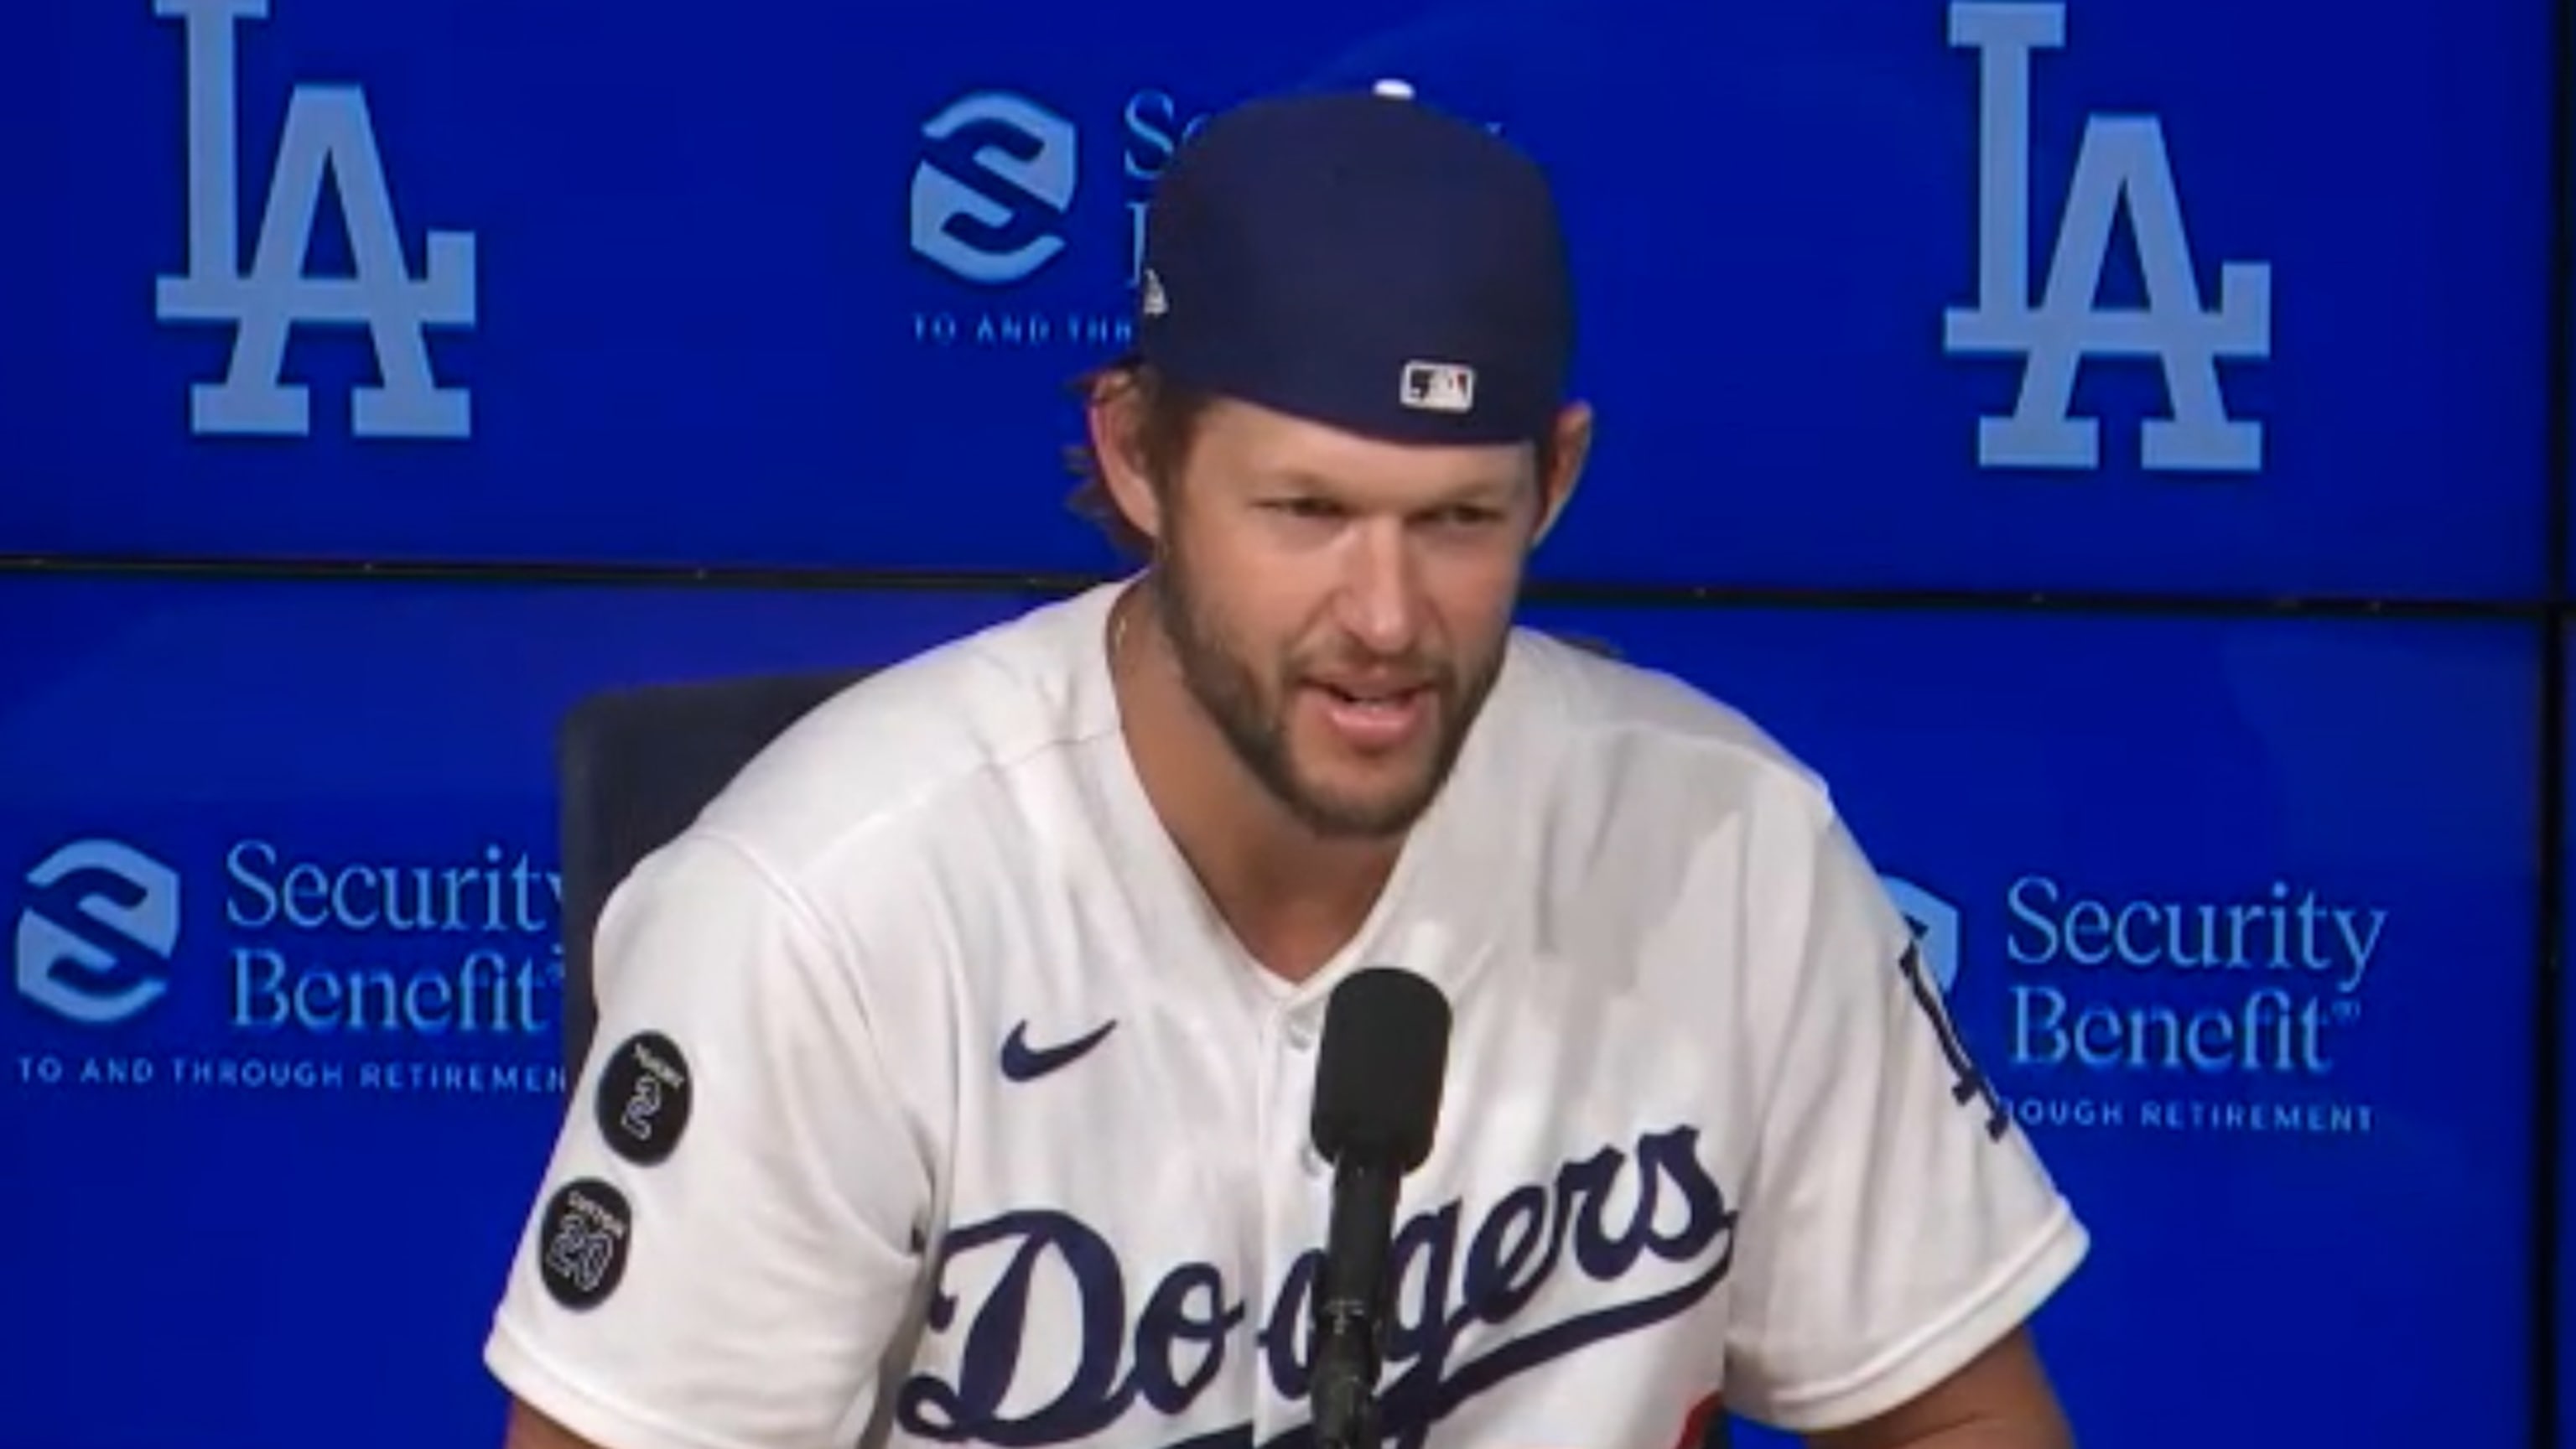 Clayton Kershaw makes All-Star case, leads Dodgers past Cubs - Los